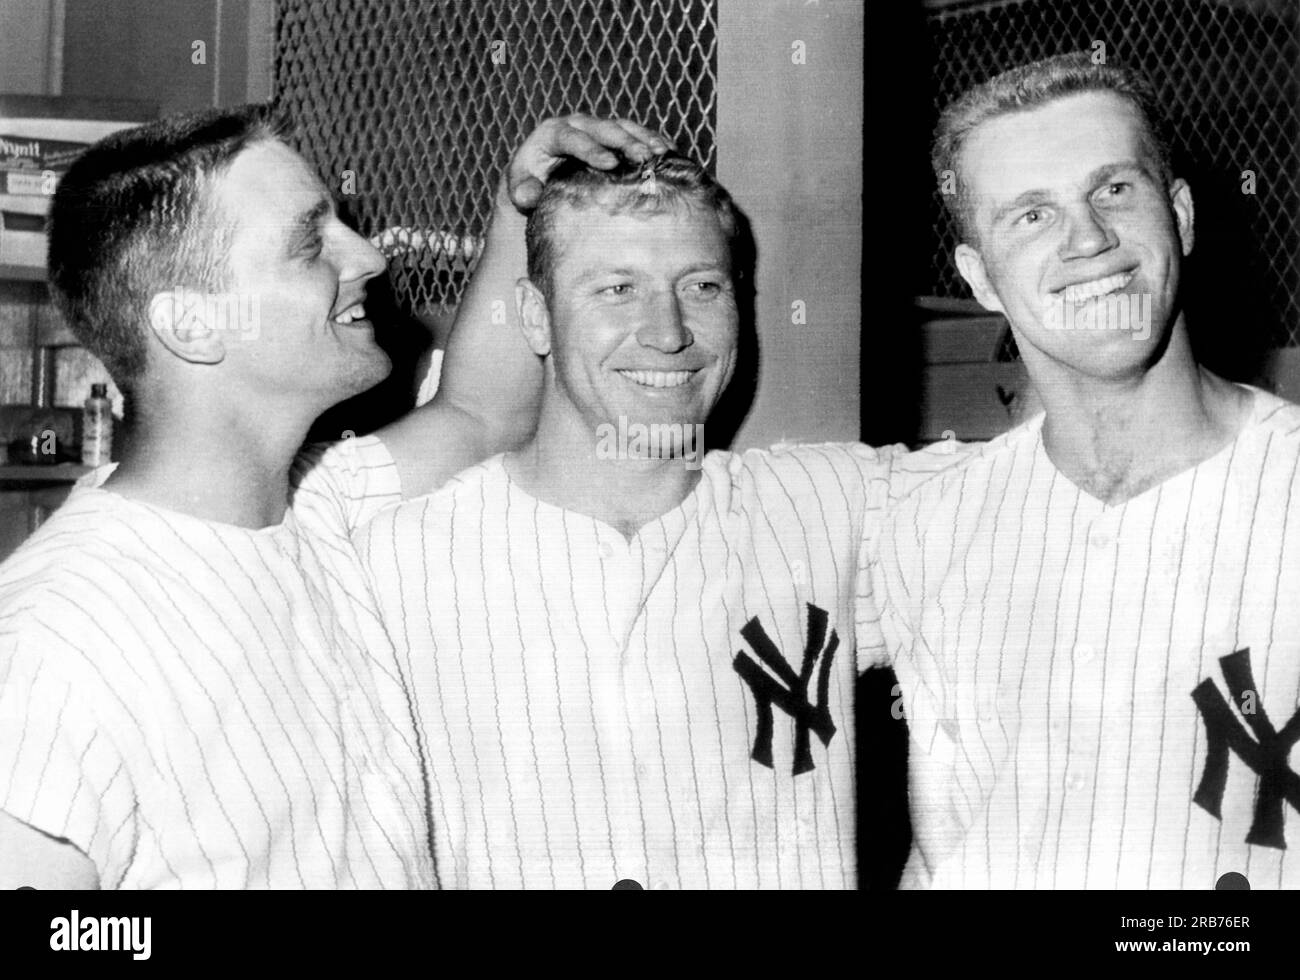 New York, New York:  July 2, 1961. Tony Kubek, Mickey Mantle, and Roger Maris celebrate a victory over the Washington Senators in the Yankee Stadium clubhouse. Maris hit one home run, and Mantle hit two in the game. Stock Photo